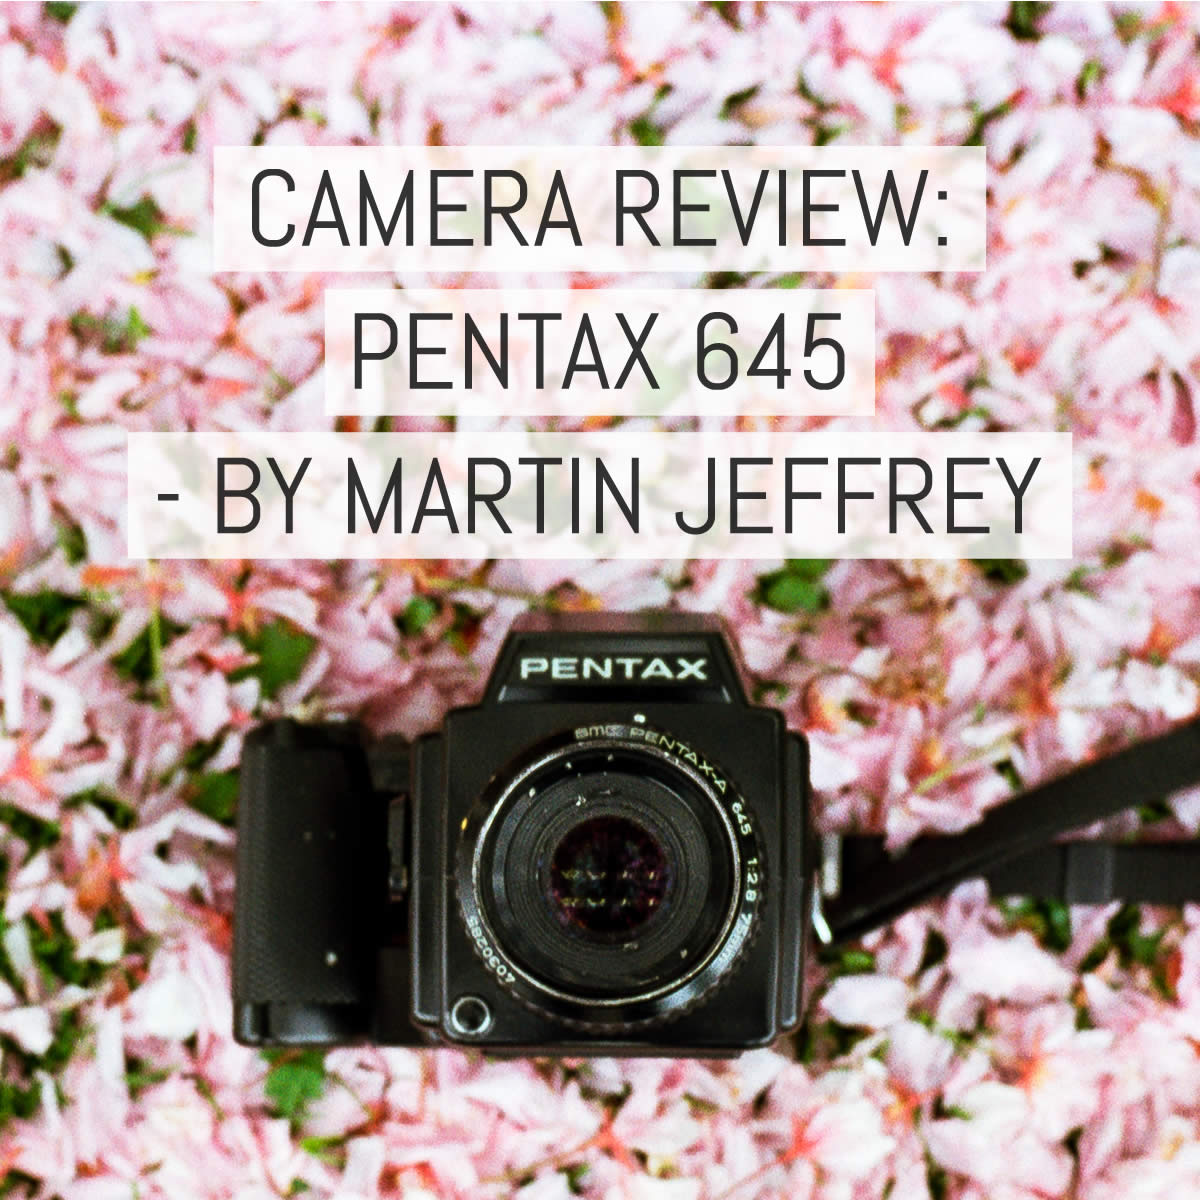 Camera review: the Pentax 645